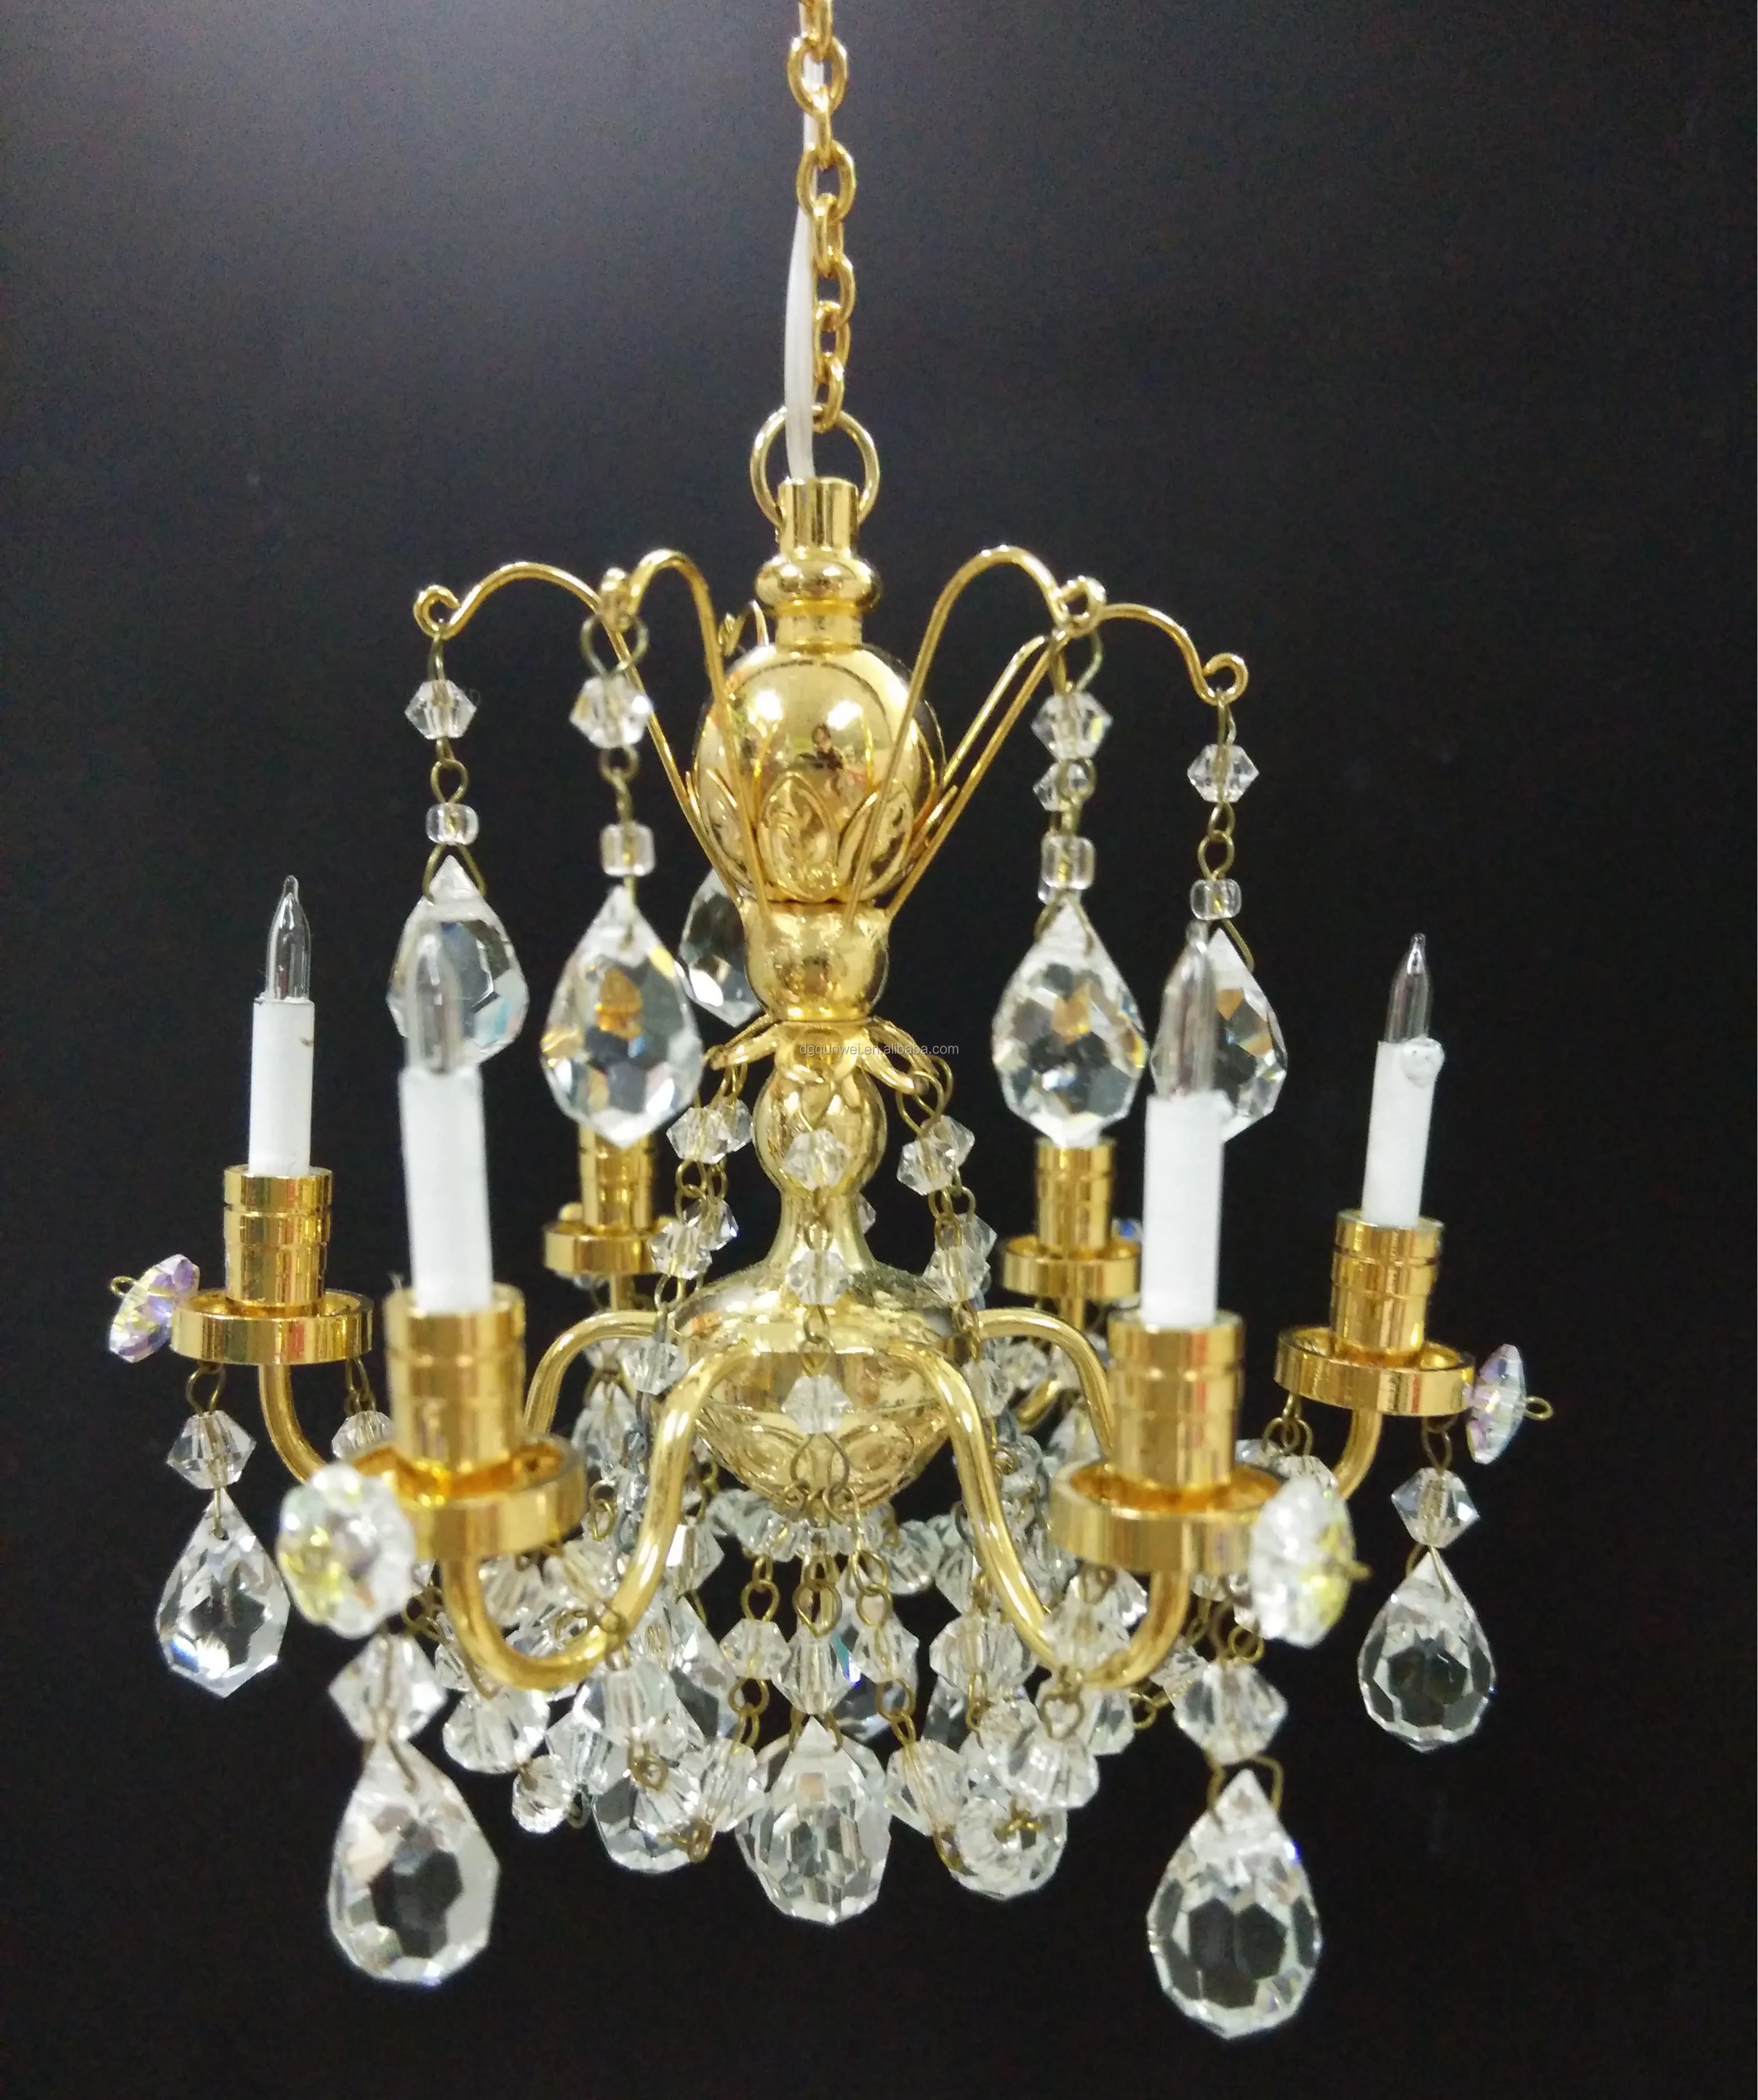 Dollhouse Miniature 6 Arm Chandelier Crystal Ceiling Lighting for Dolls Wireless LED lamp for Dolls House